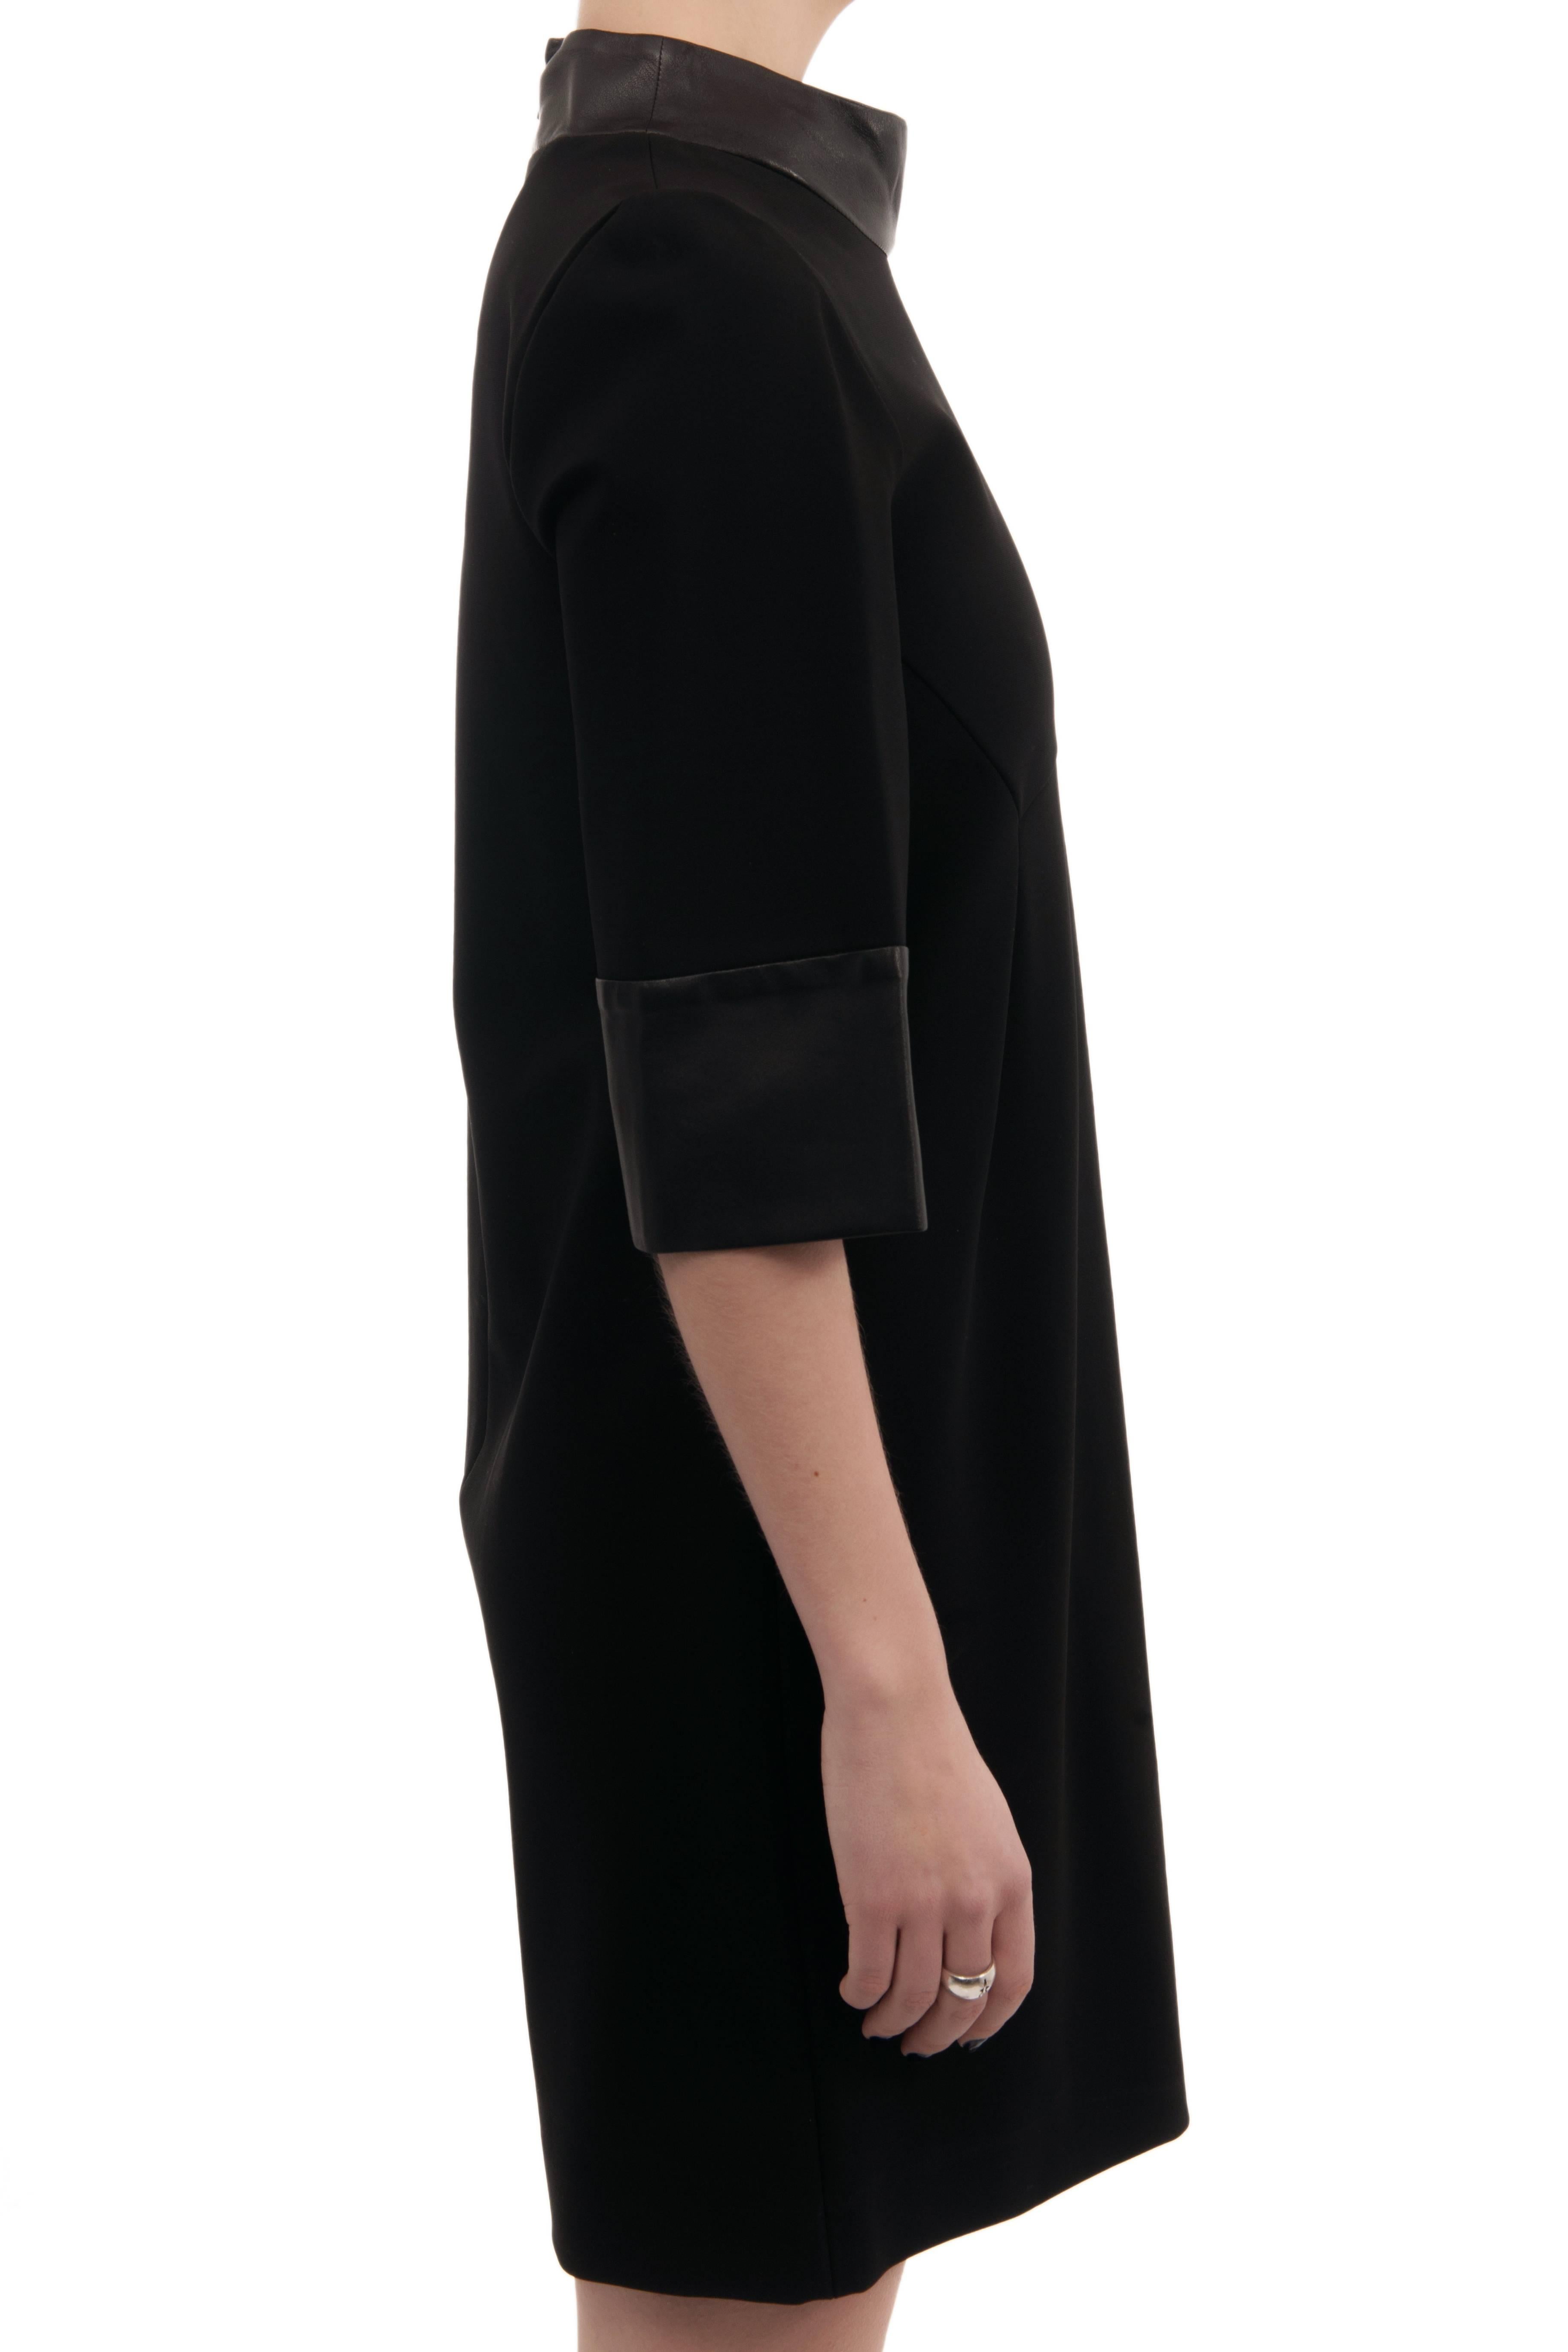 Gucci Black Stretch Crepe Dress with Leather Cuffs and Collar  For Sale 1